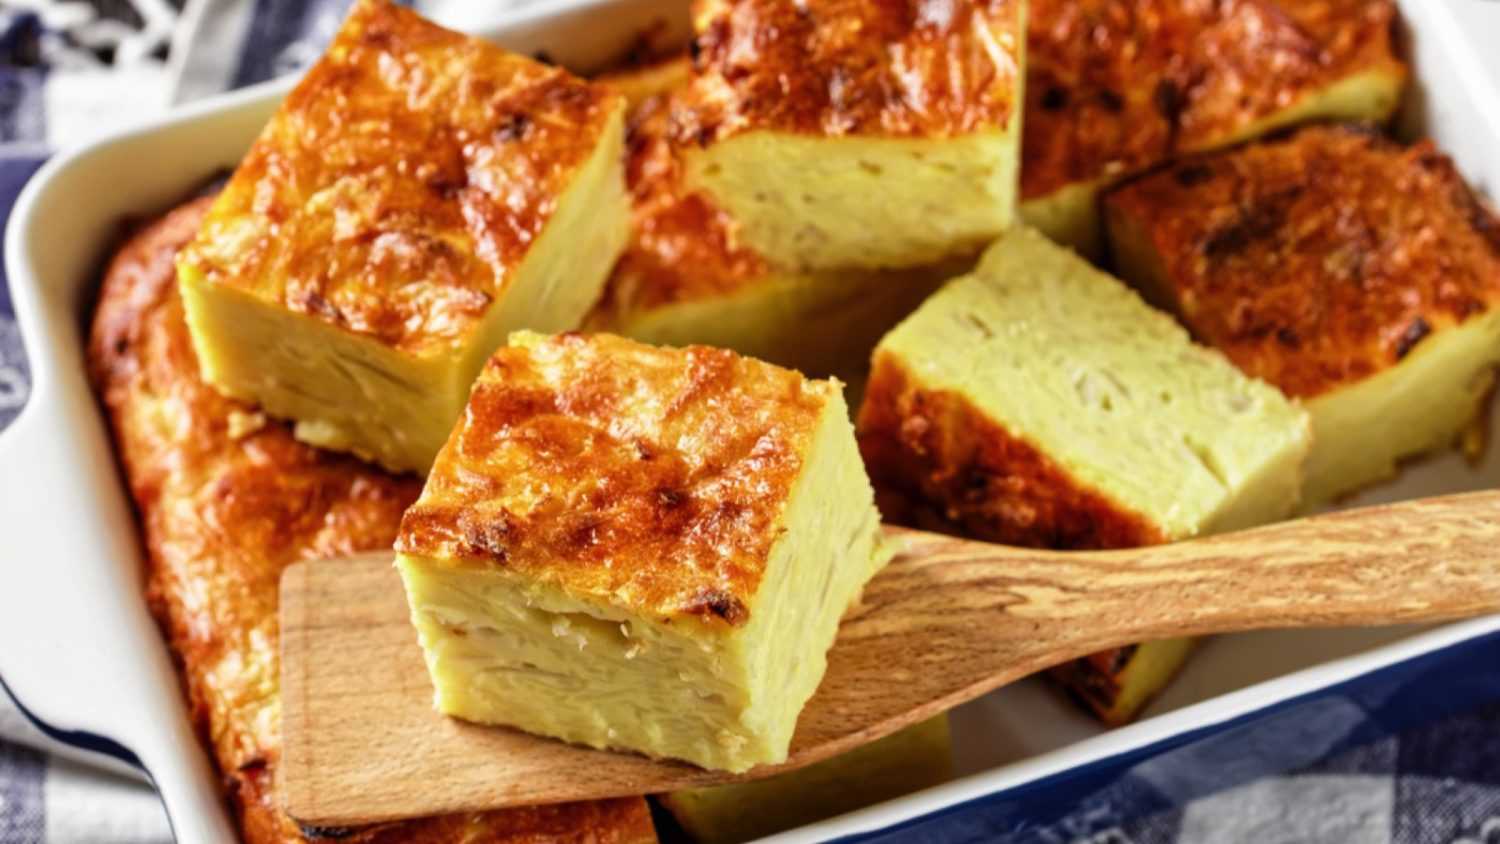 potato kugel, baked pudding or casserole of grated potato cut in portions in a baking dish on a wooden table, jewish holiday recipe, close-up